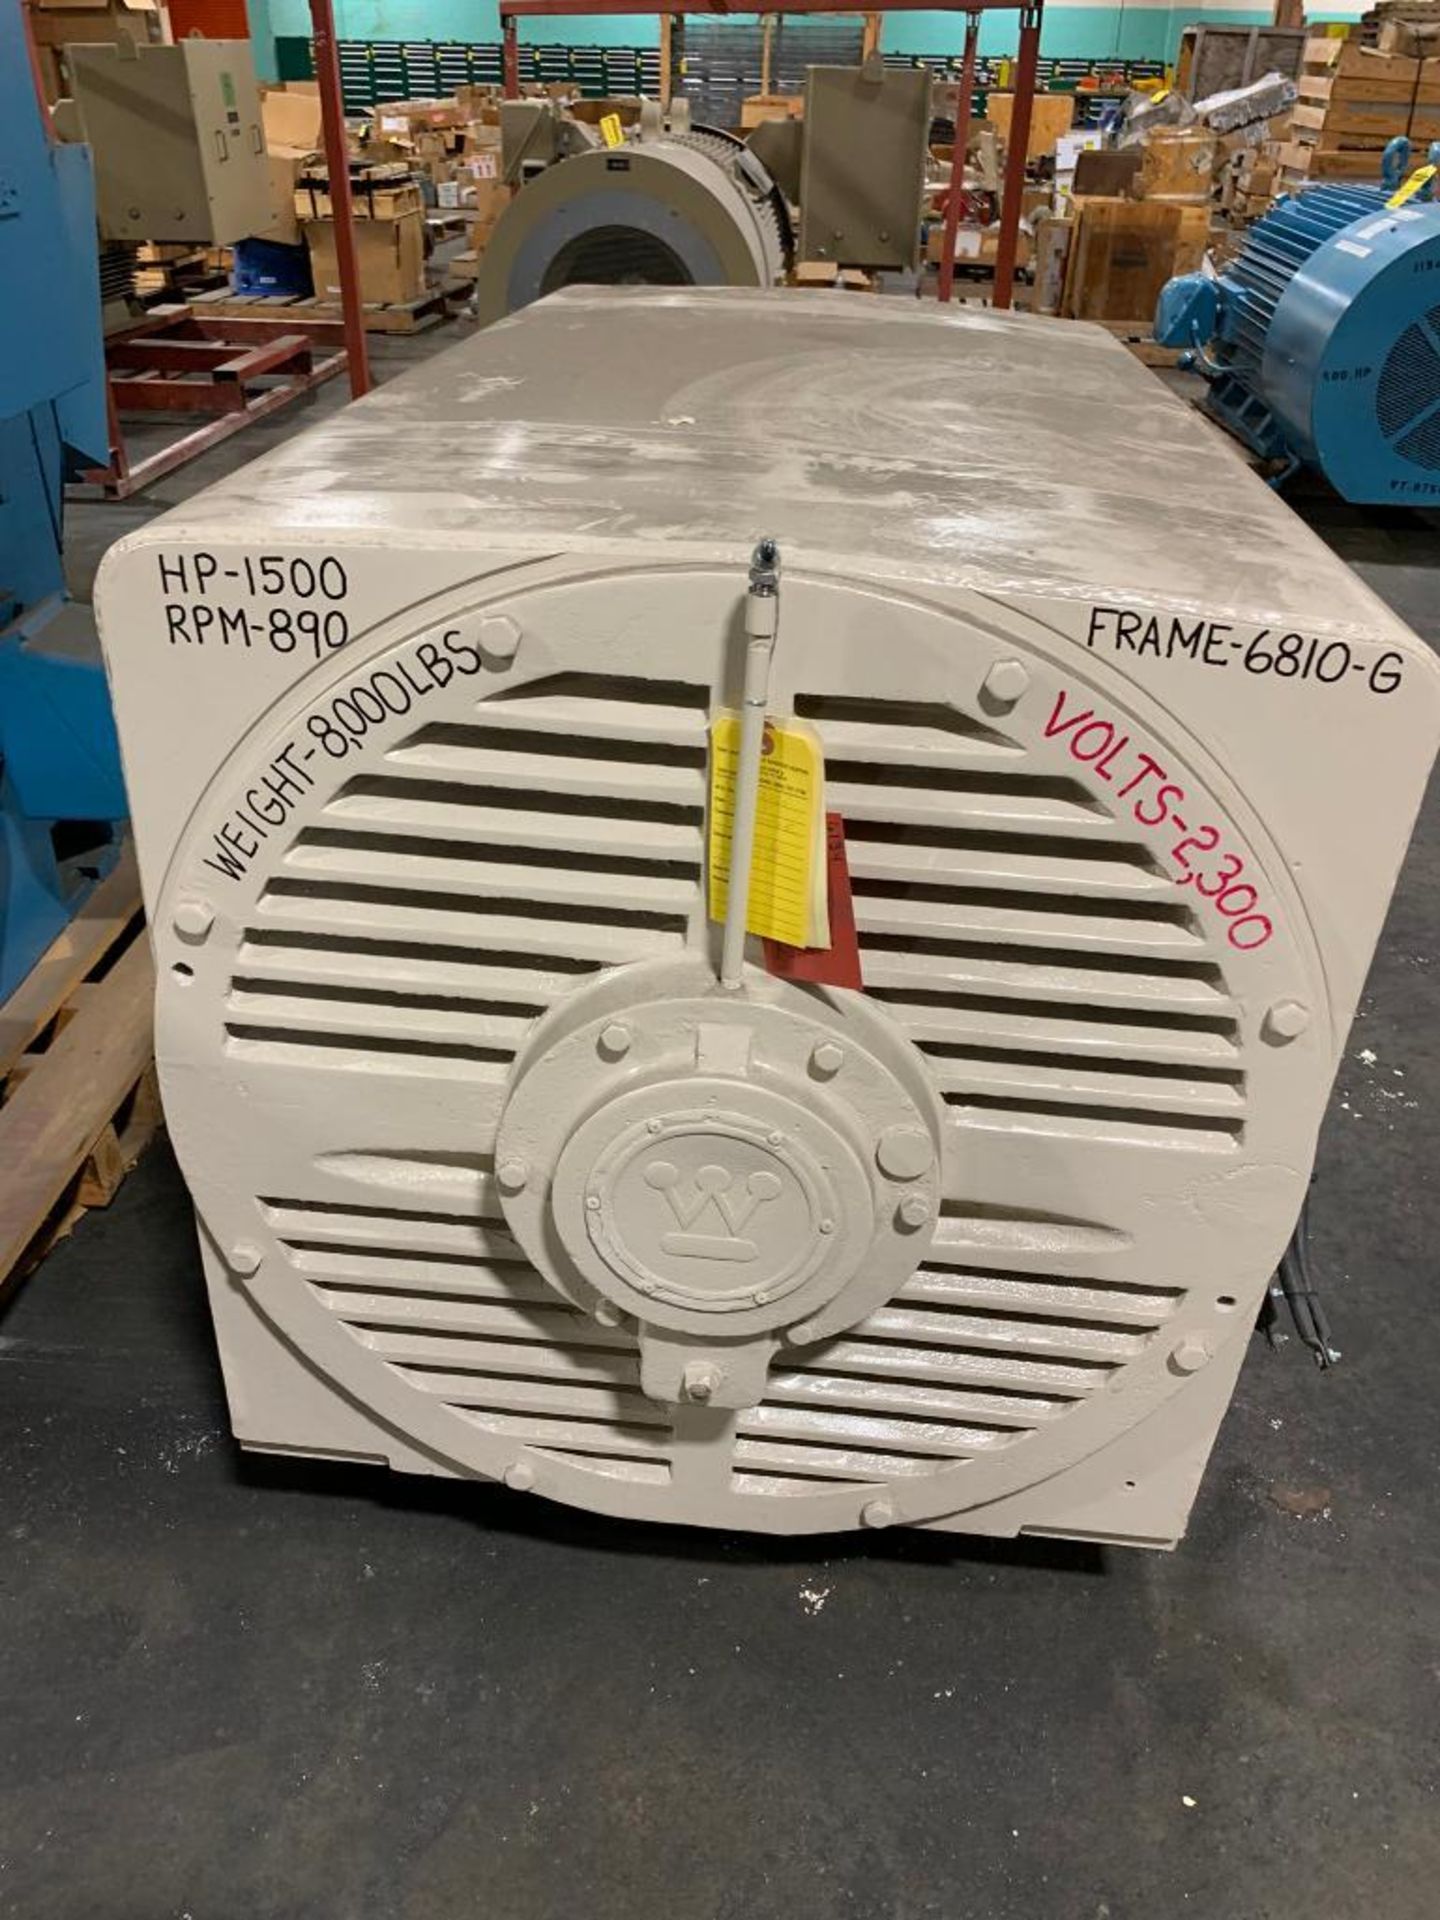 Westinghouse 1500-HP Electric Motor, 890 RPM, 2300 V, 3 PH, FR: 6810G - Image 5 of 8